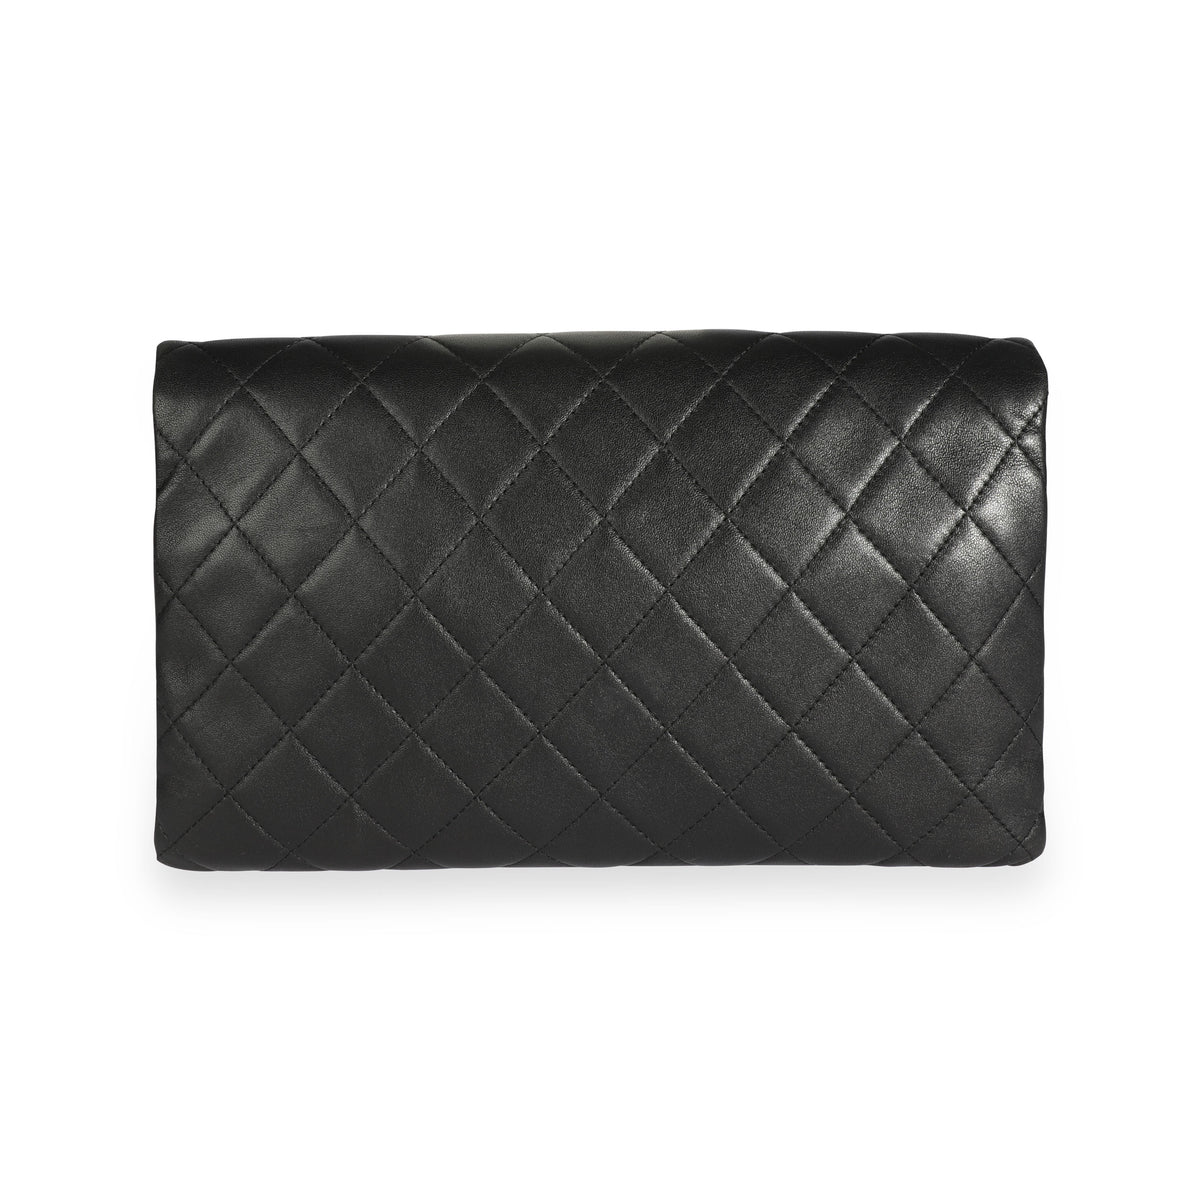 Chanel Black Quilted Lambskin Beauty Clutch